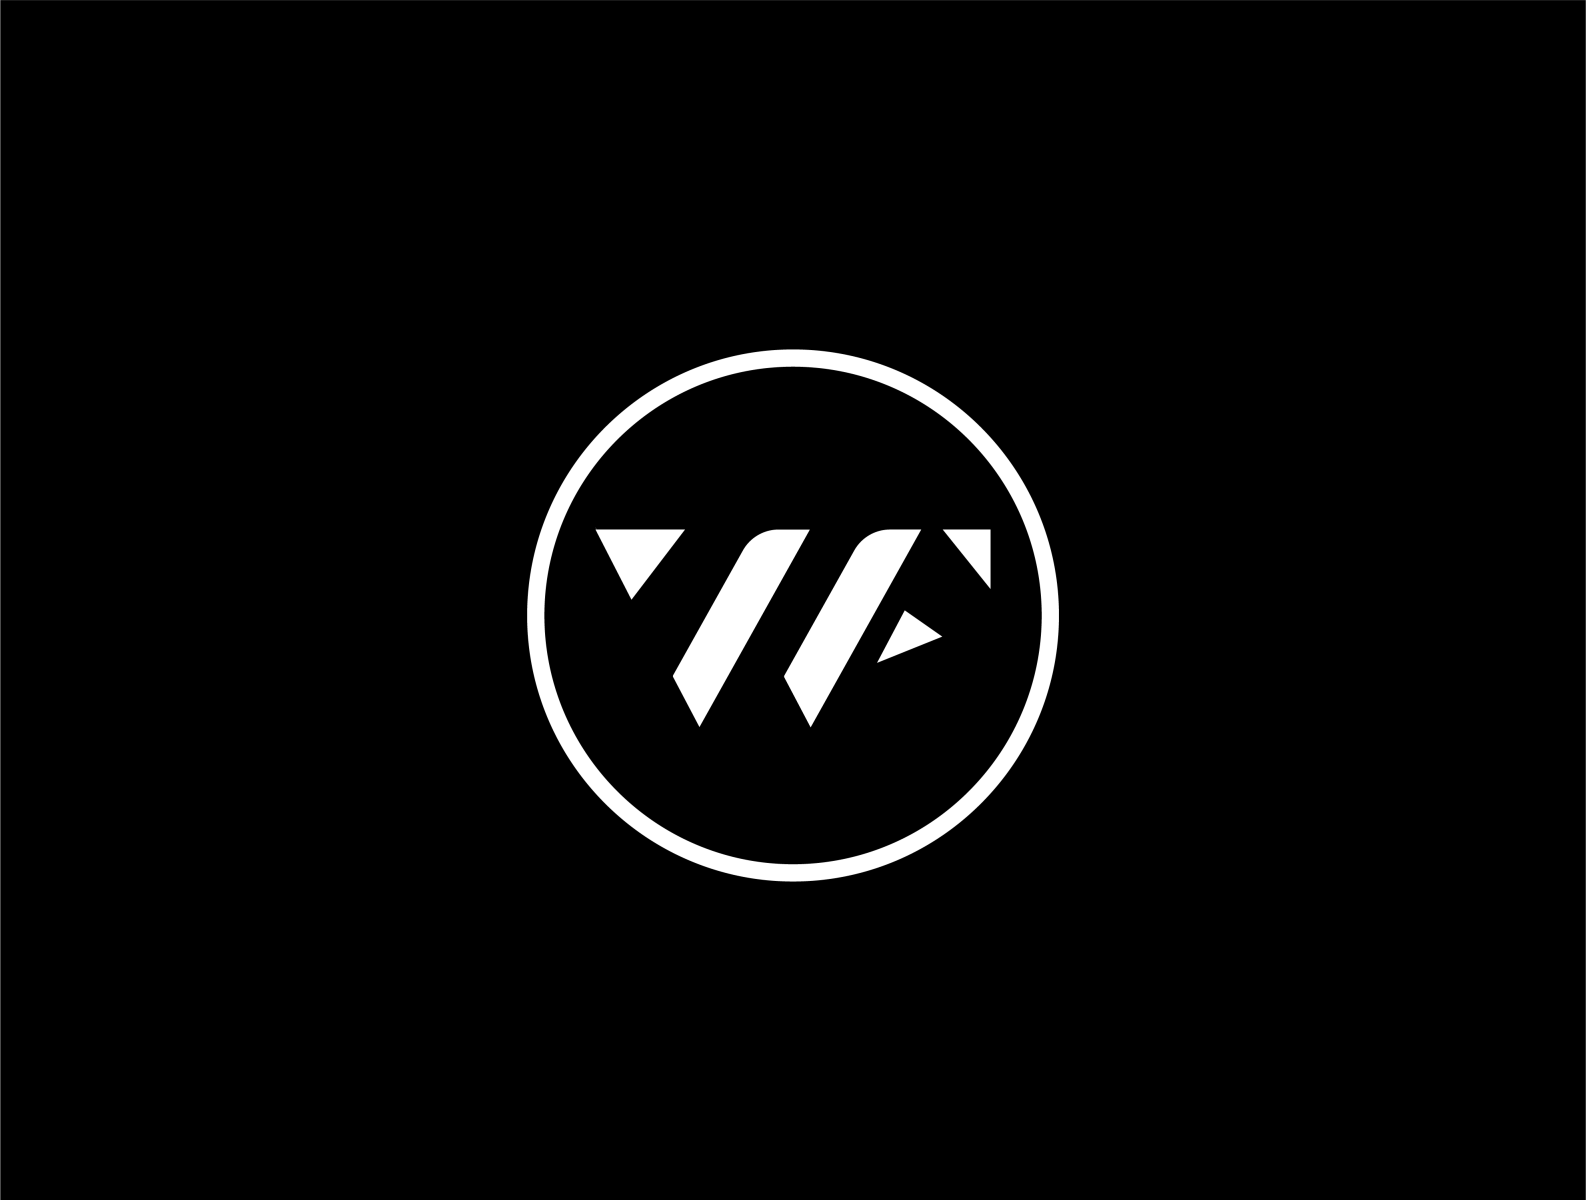 Initial letter wf logo template with circle icon Vector Image